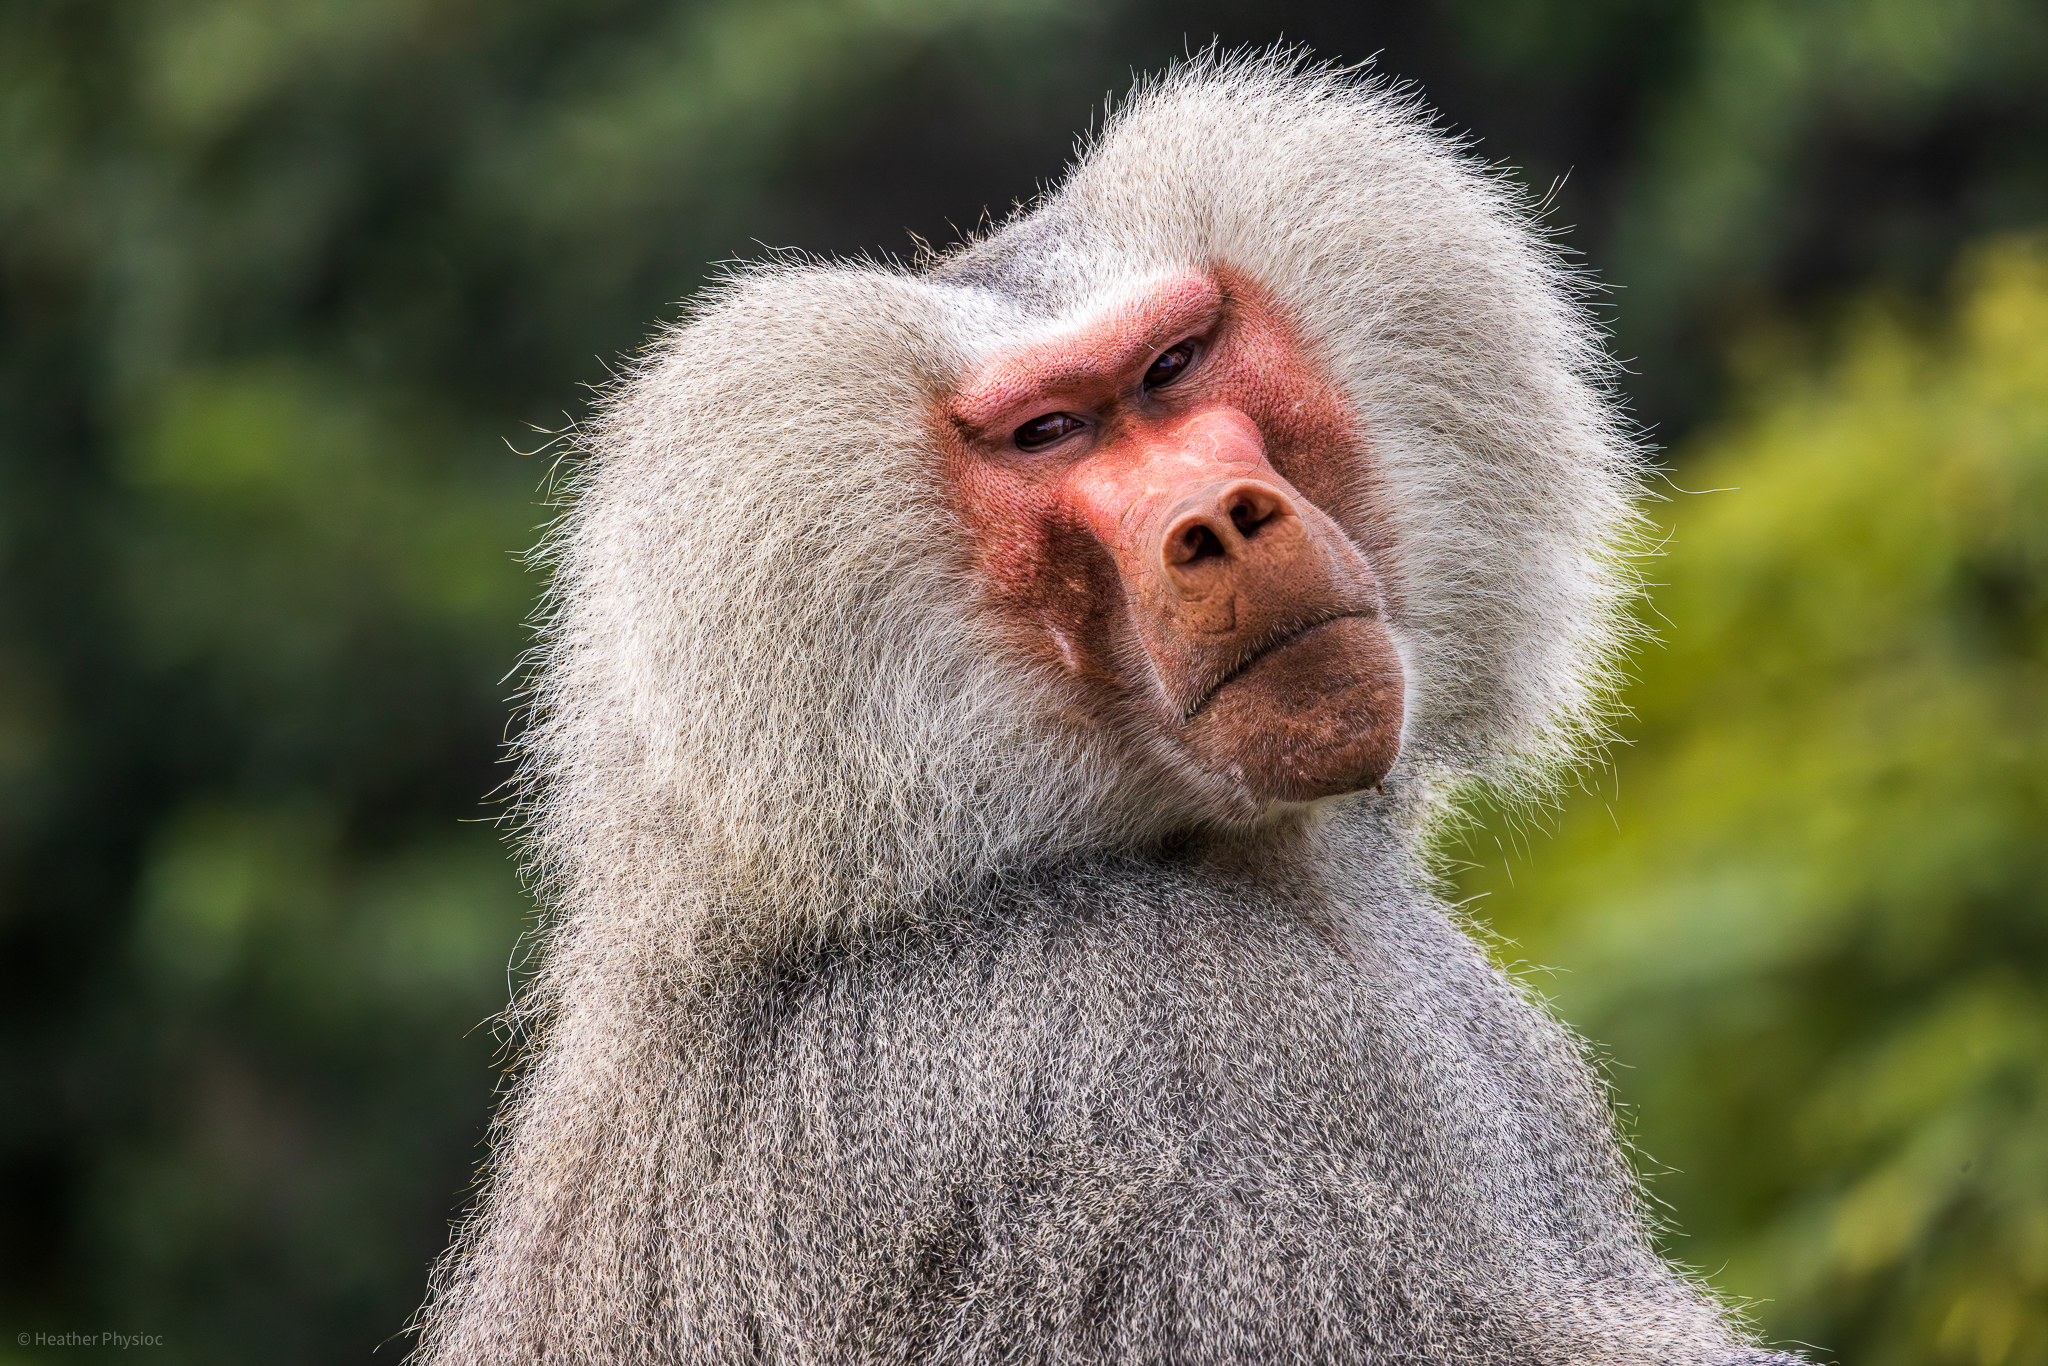 Male hamadryas baboon portrait at the San Diego Zoo